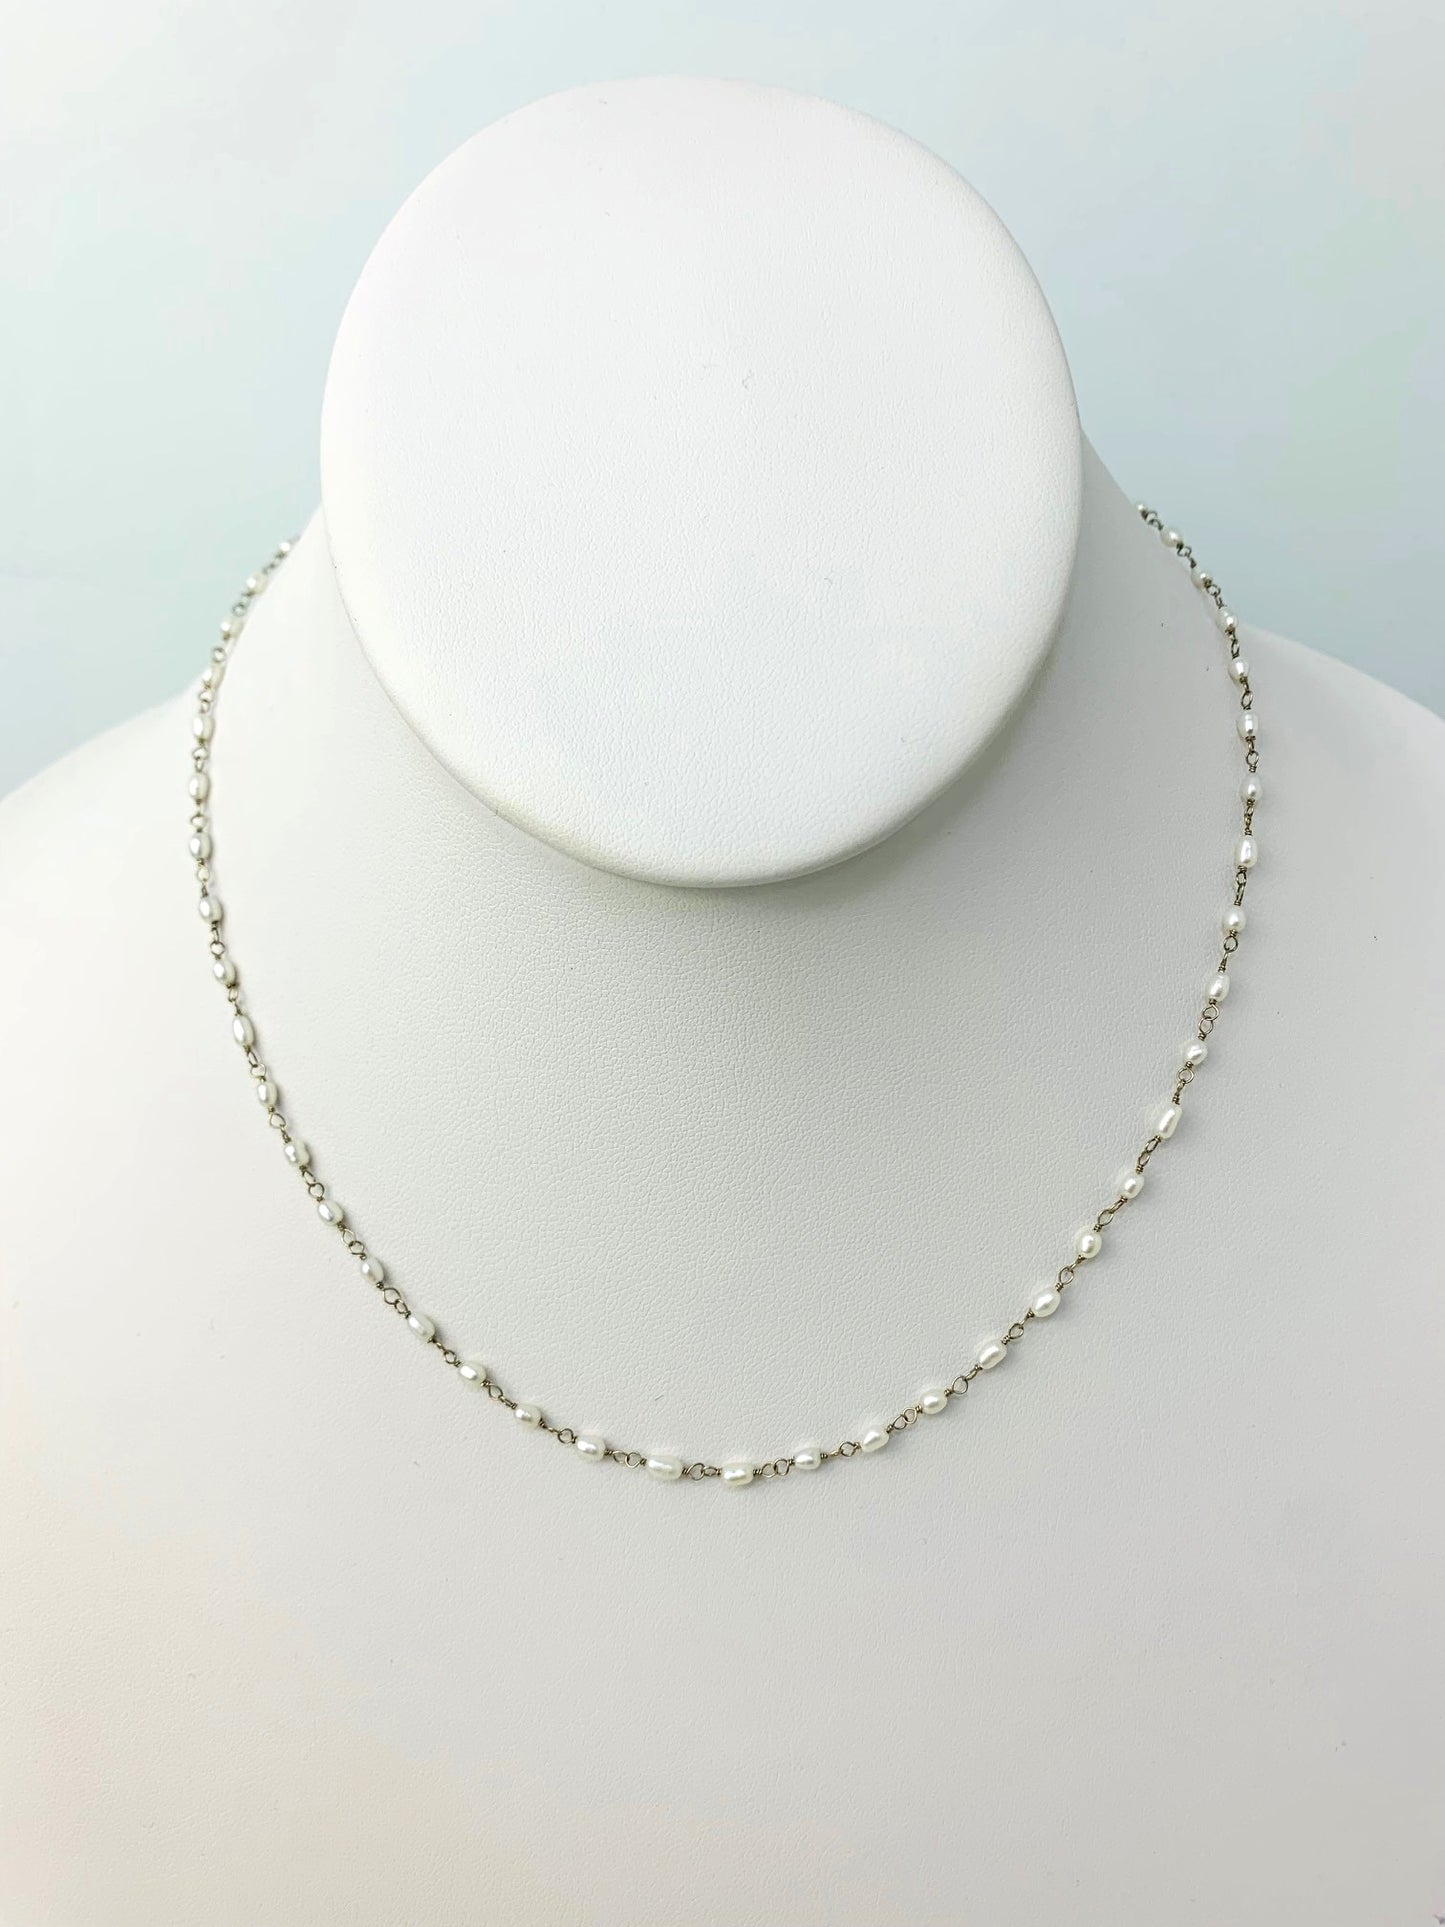 16" Rice Pearl Rosary Necklace in 18KW - NCK-201-ROSPRL18W-WH-16